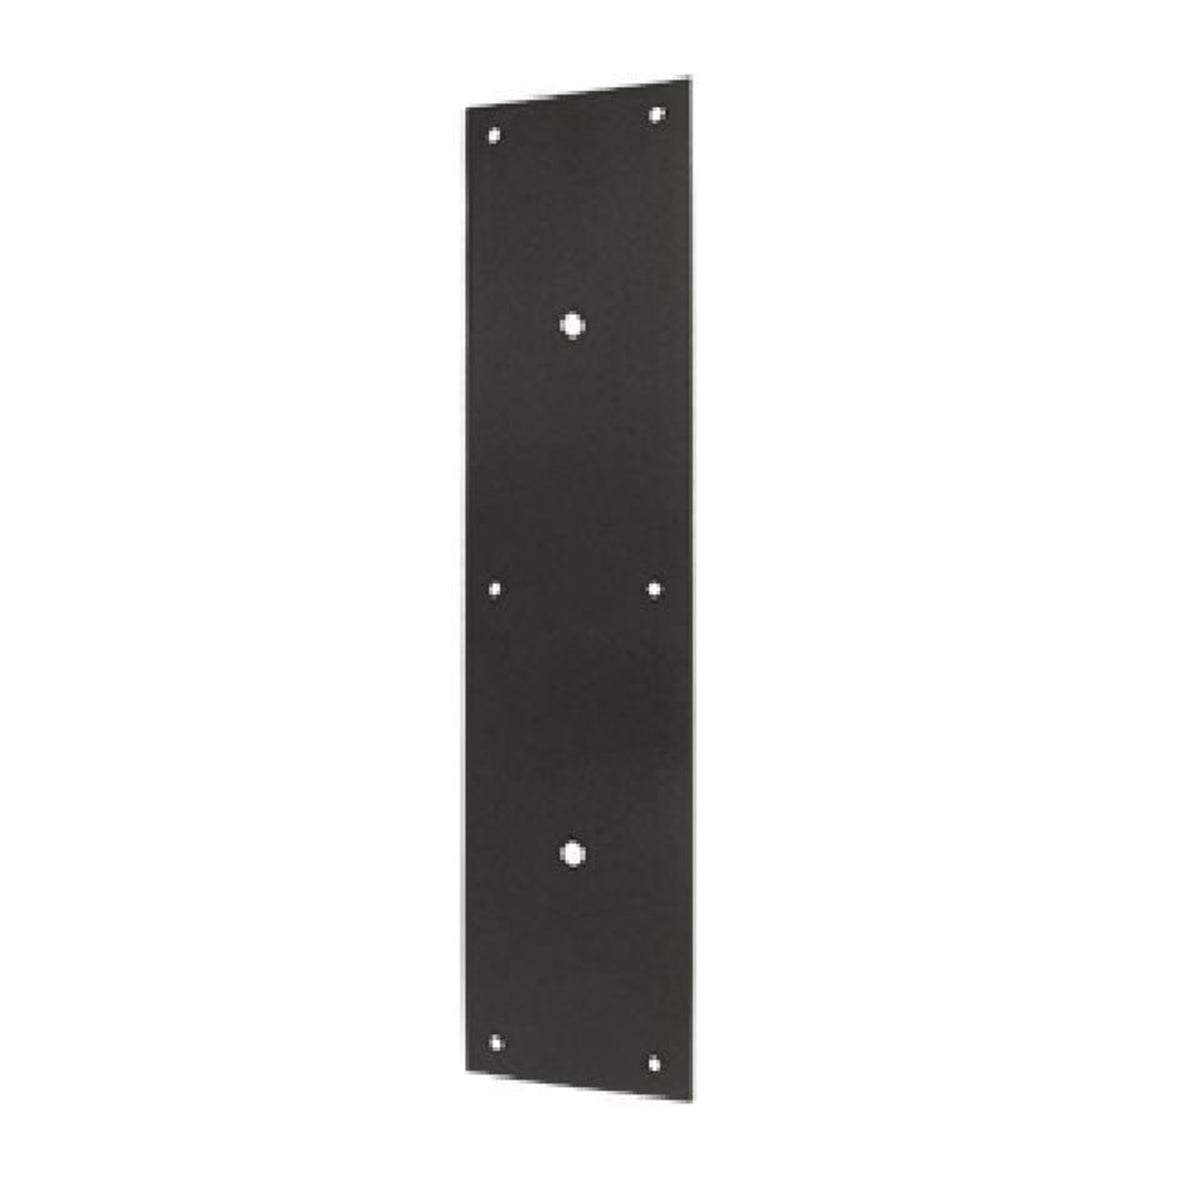 Deltana PPH3515U10B Push Plate For Door Pull, Oil Rubbed Bronze